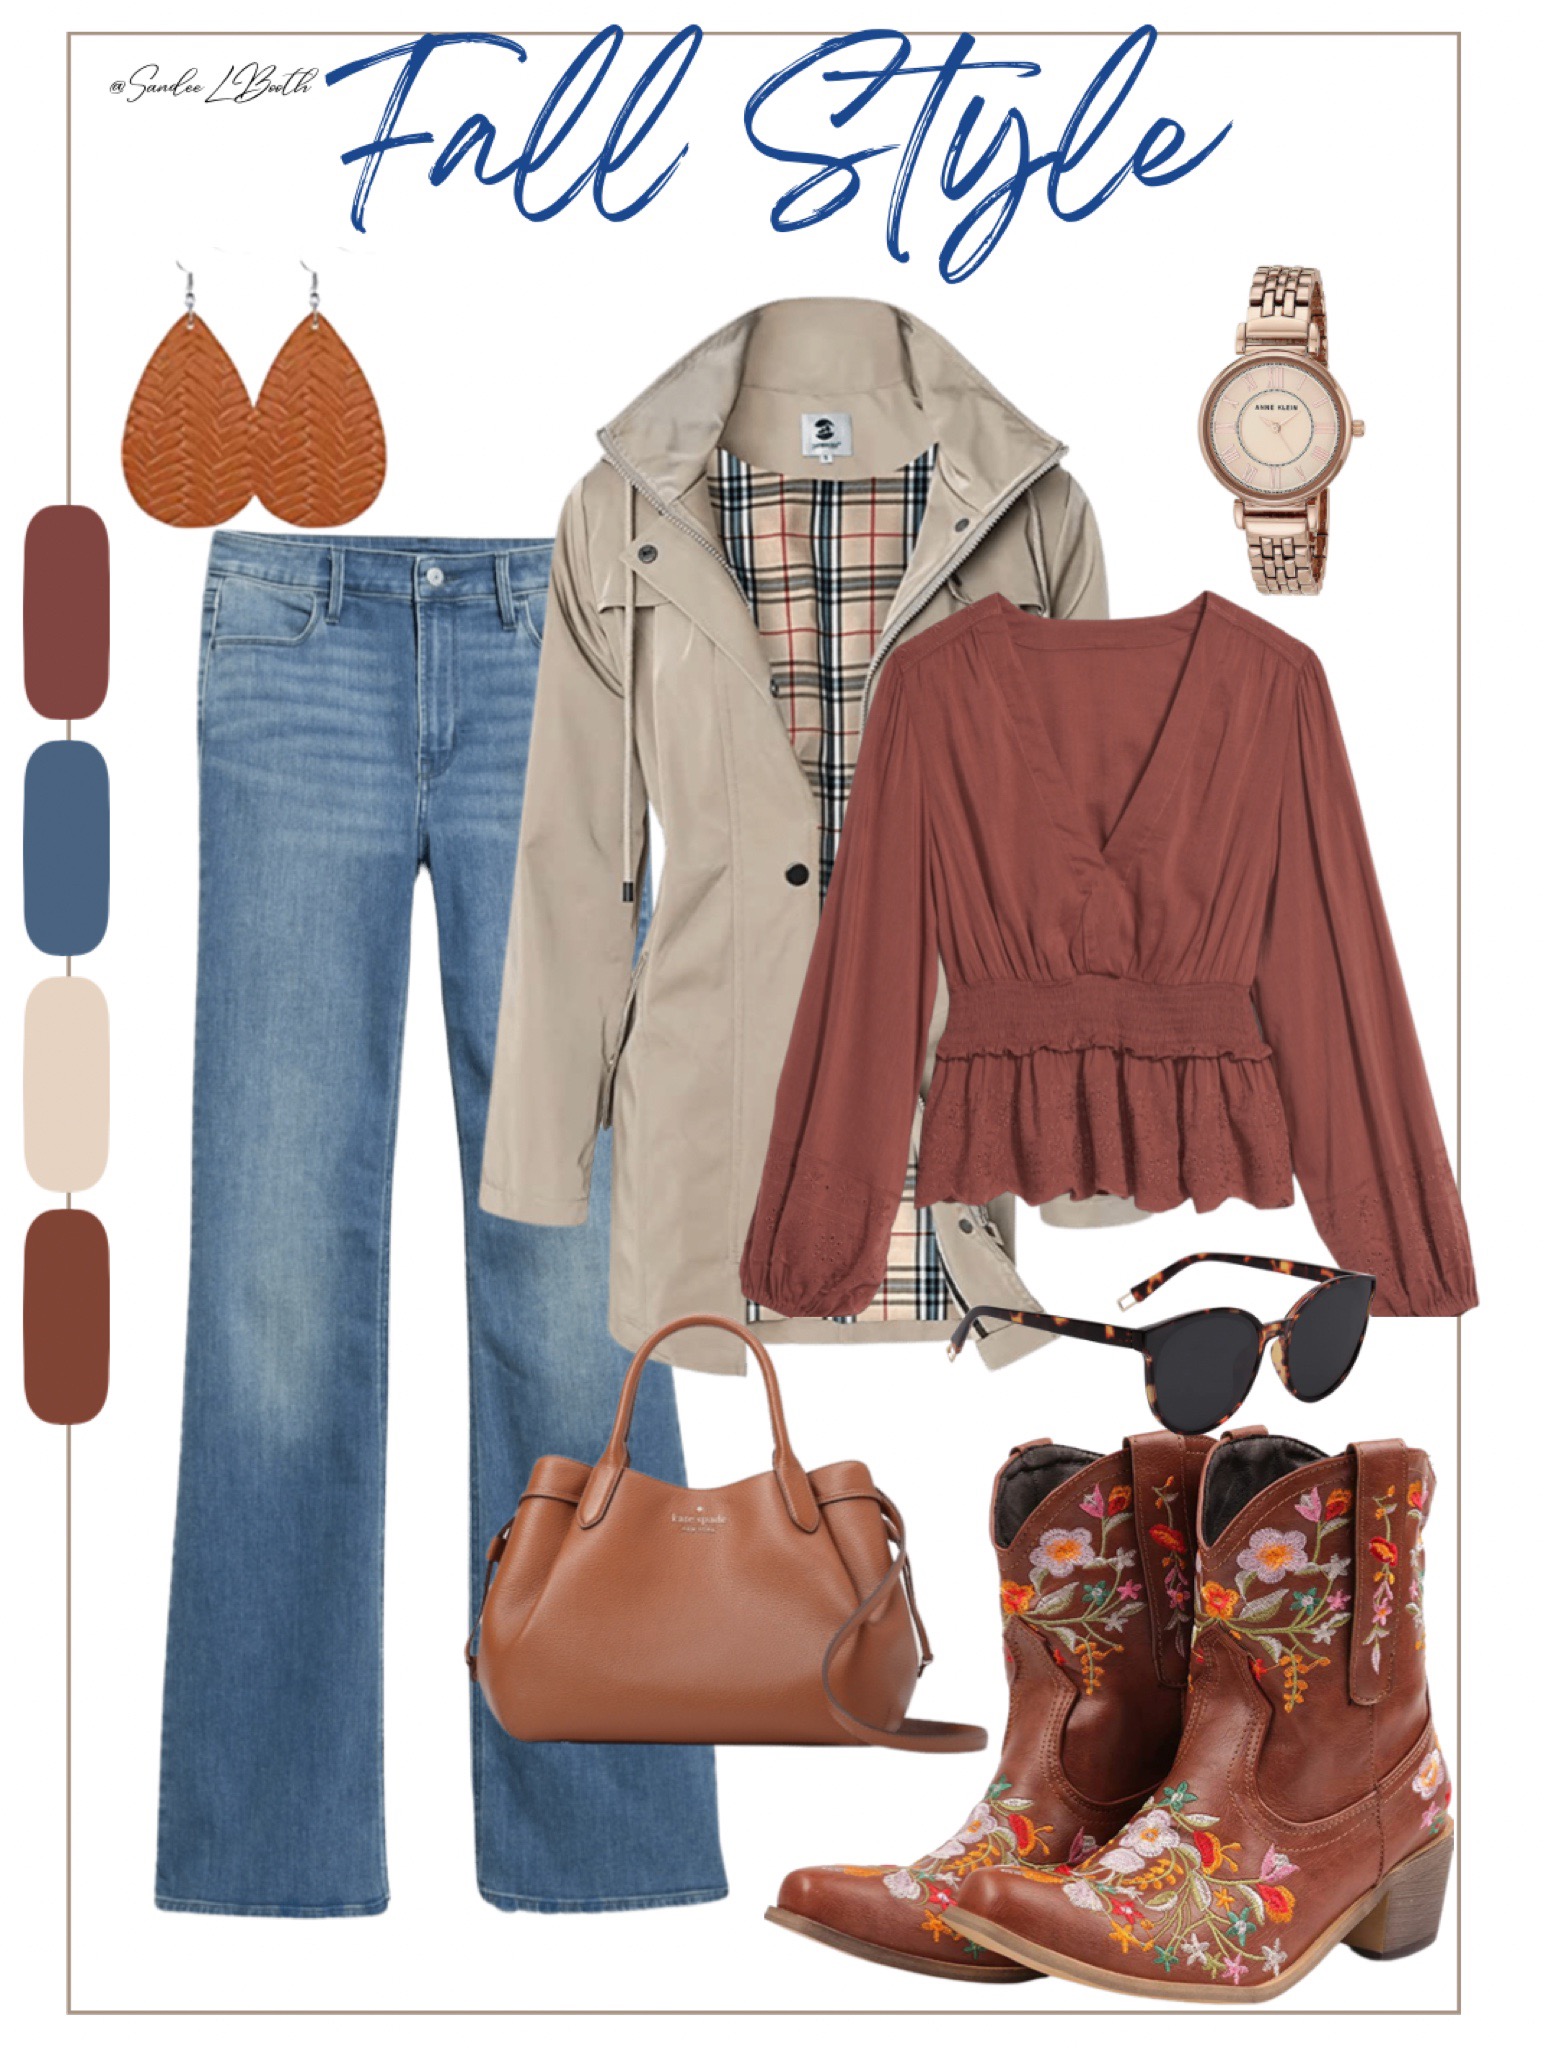 collage of outfit inspiration with jeans, coat, and top